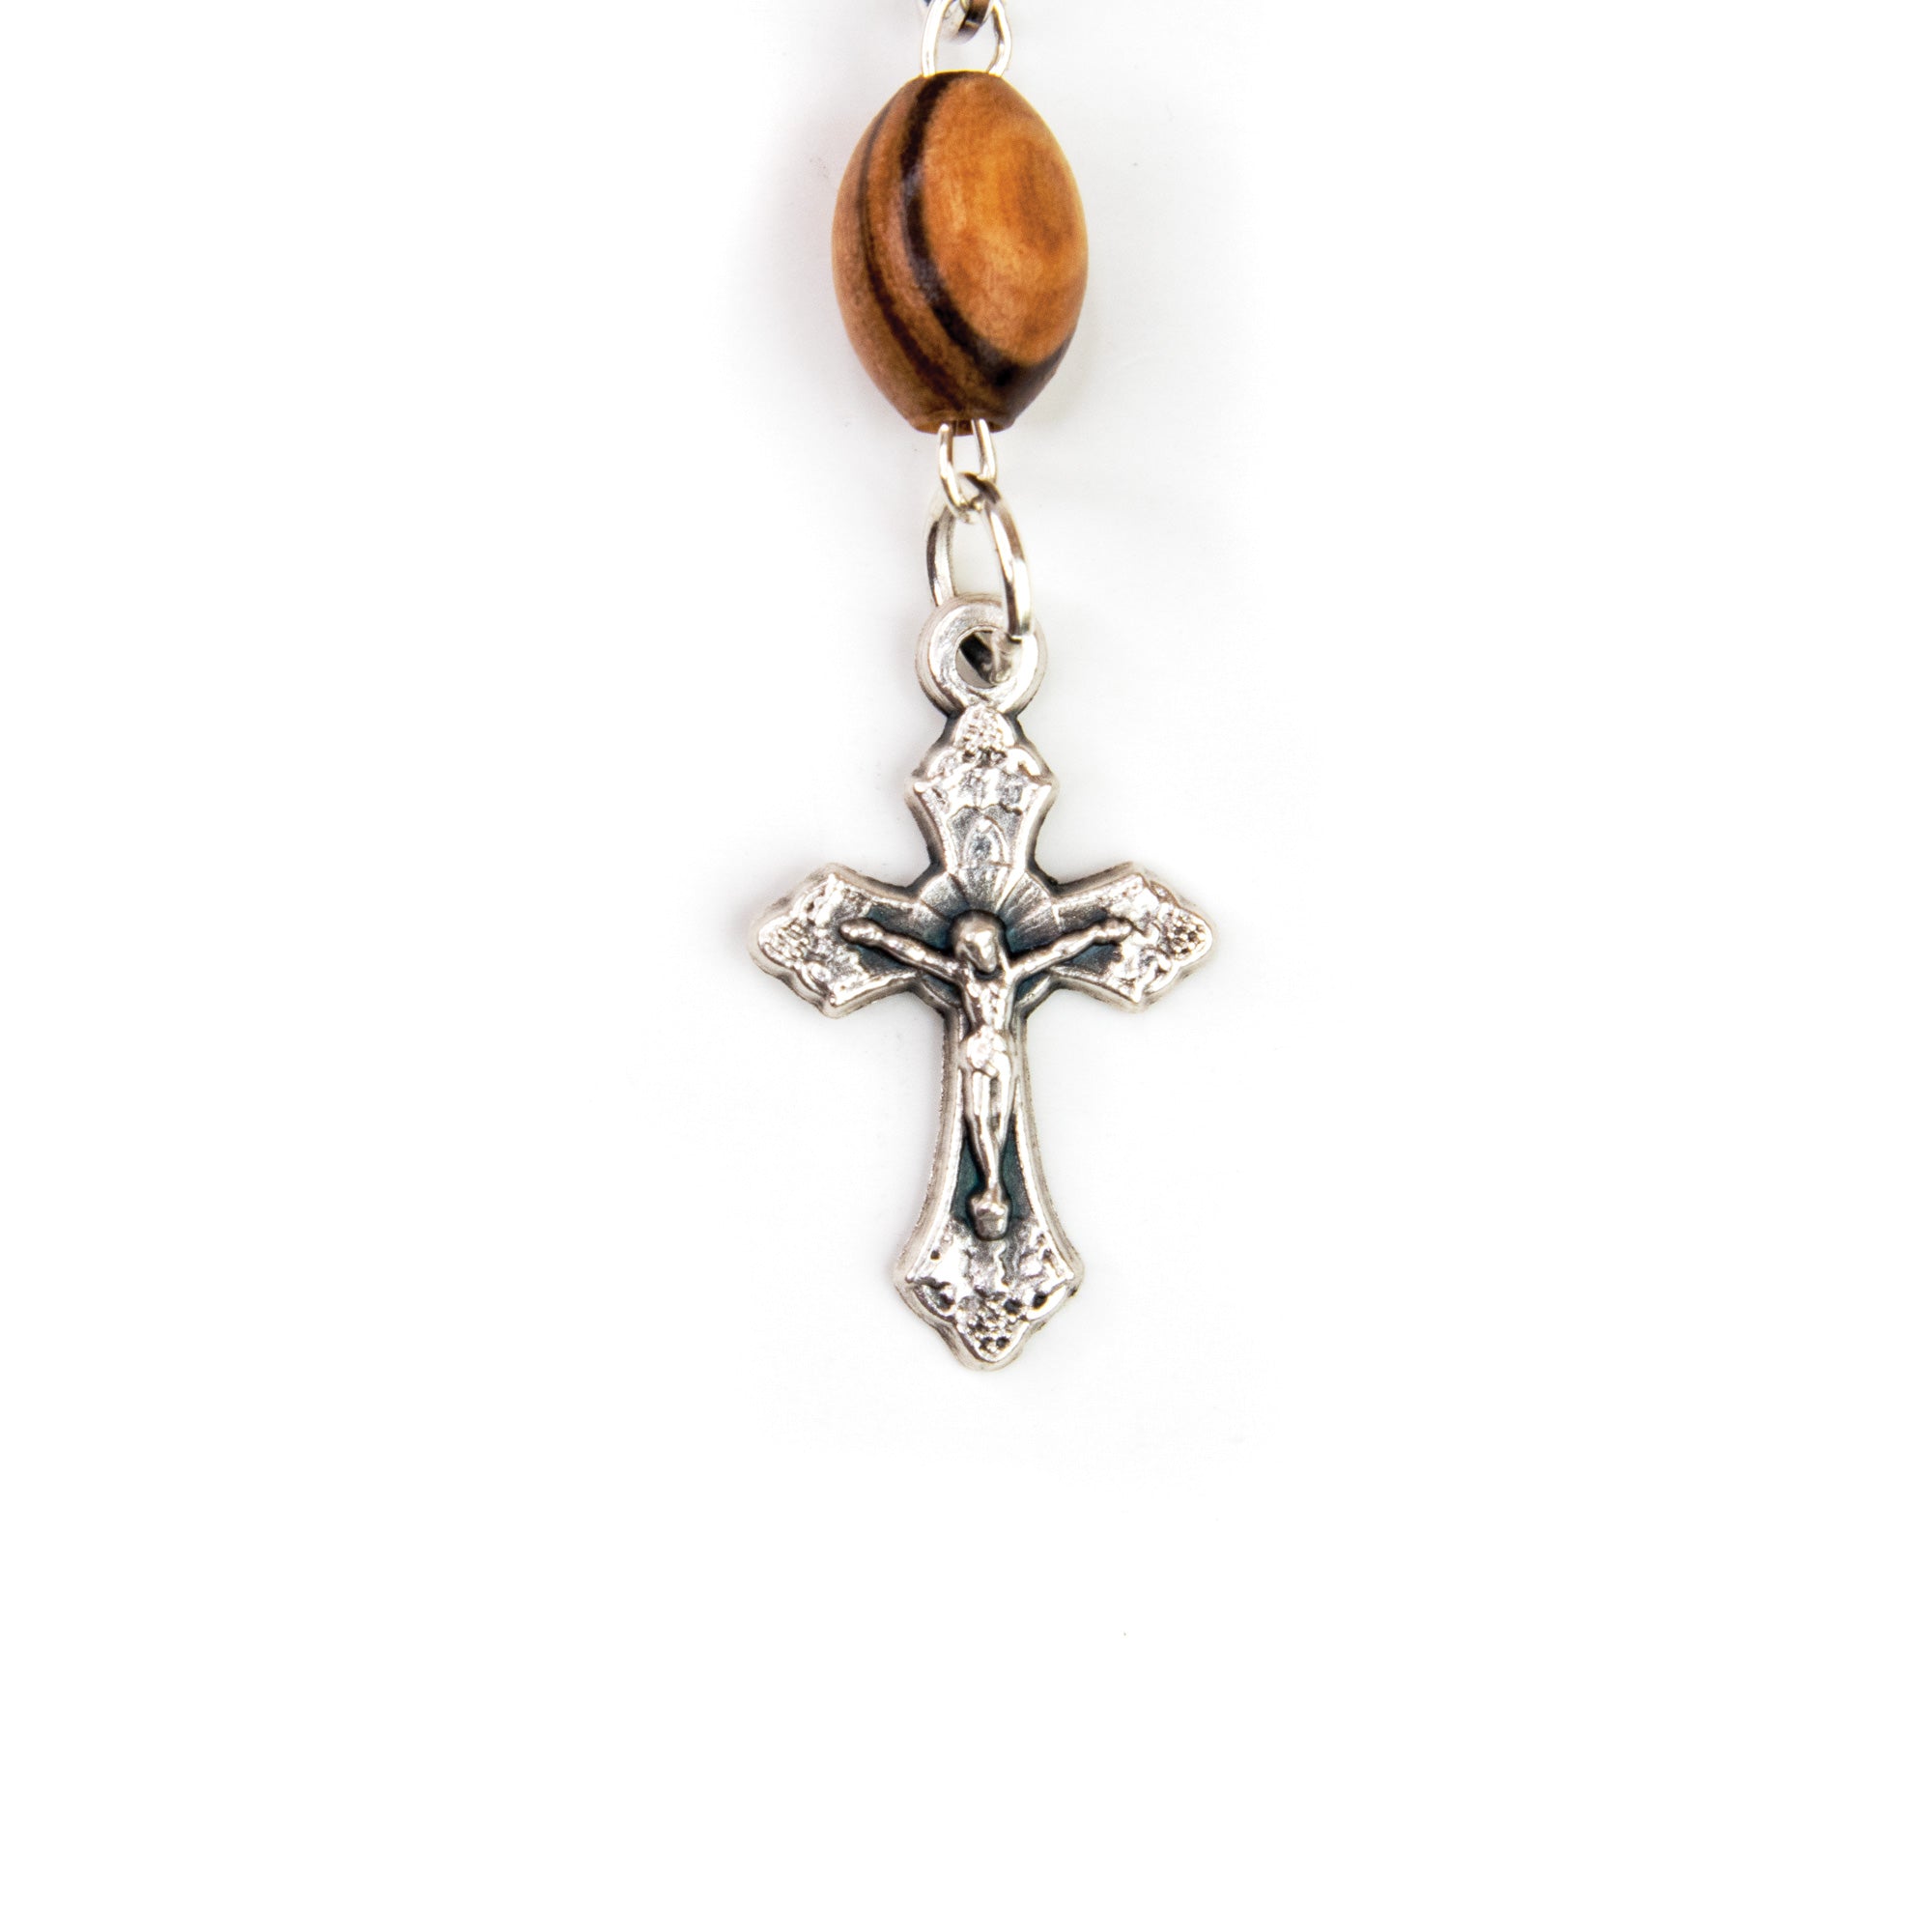 Our Lady of Grace, Holy Land Olive Wood Pocket Auto Rosary, Made in Bethlehem cross detail